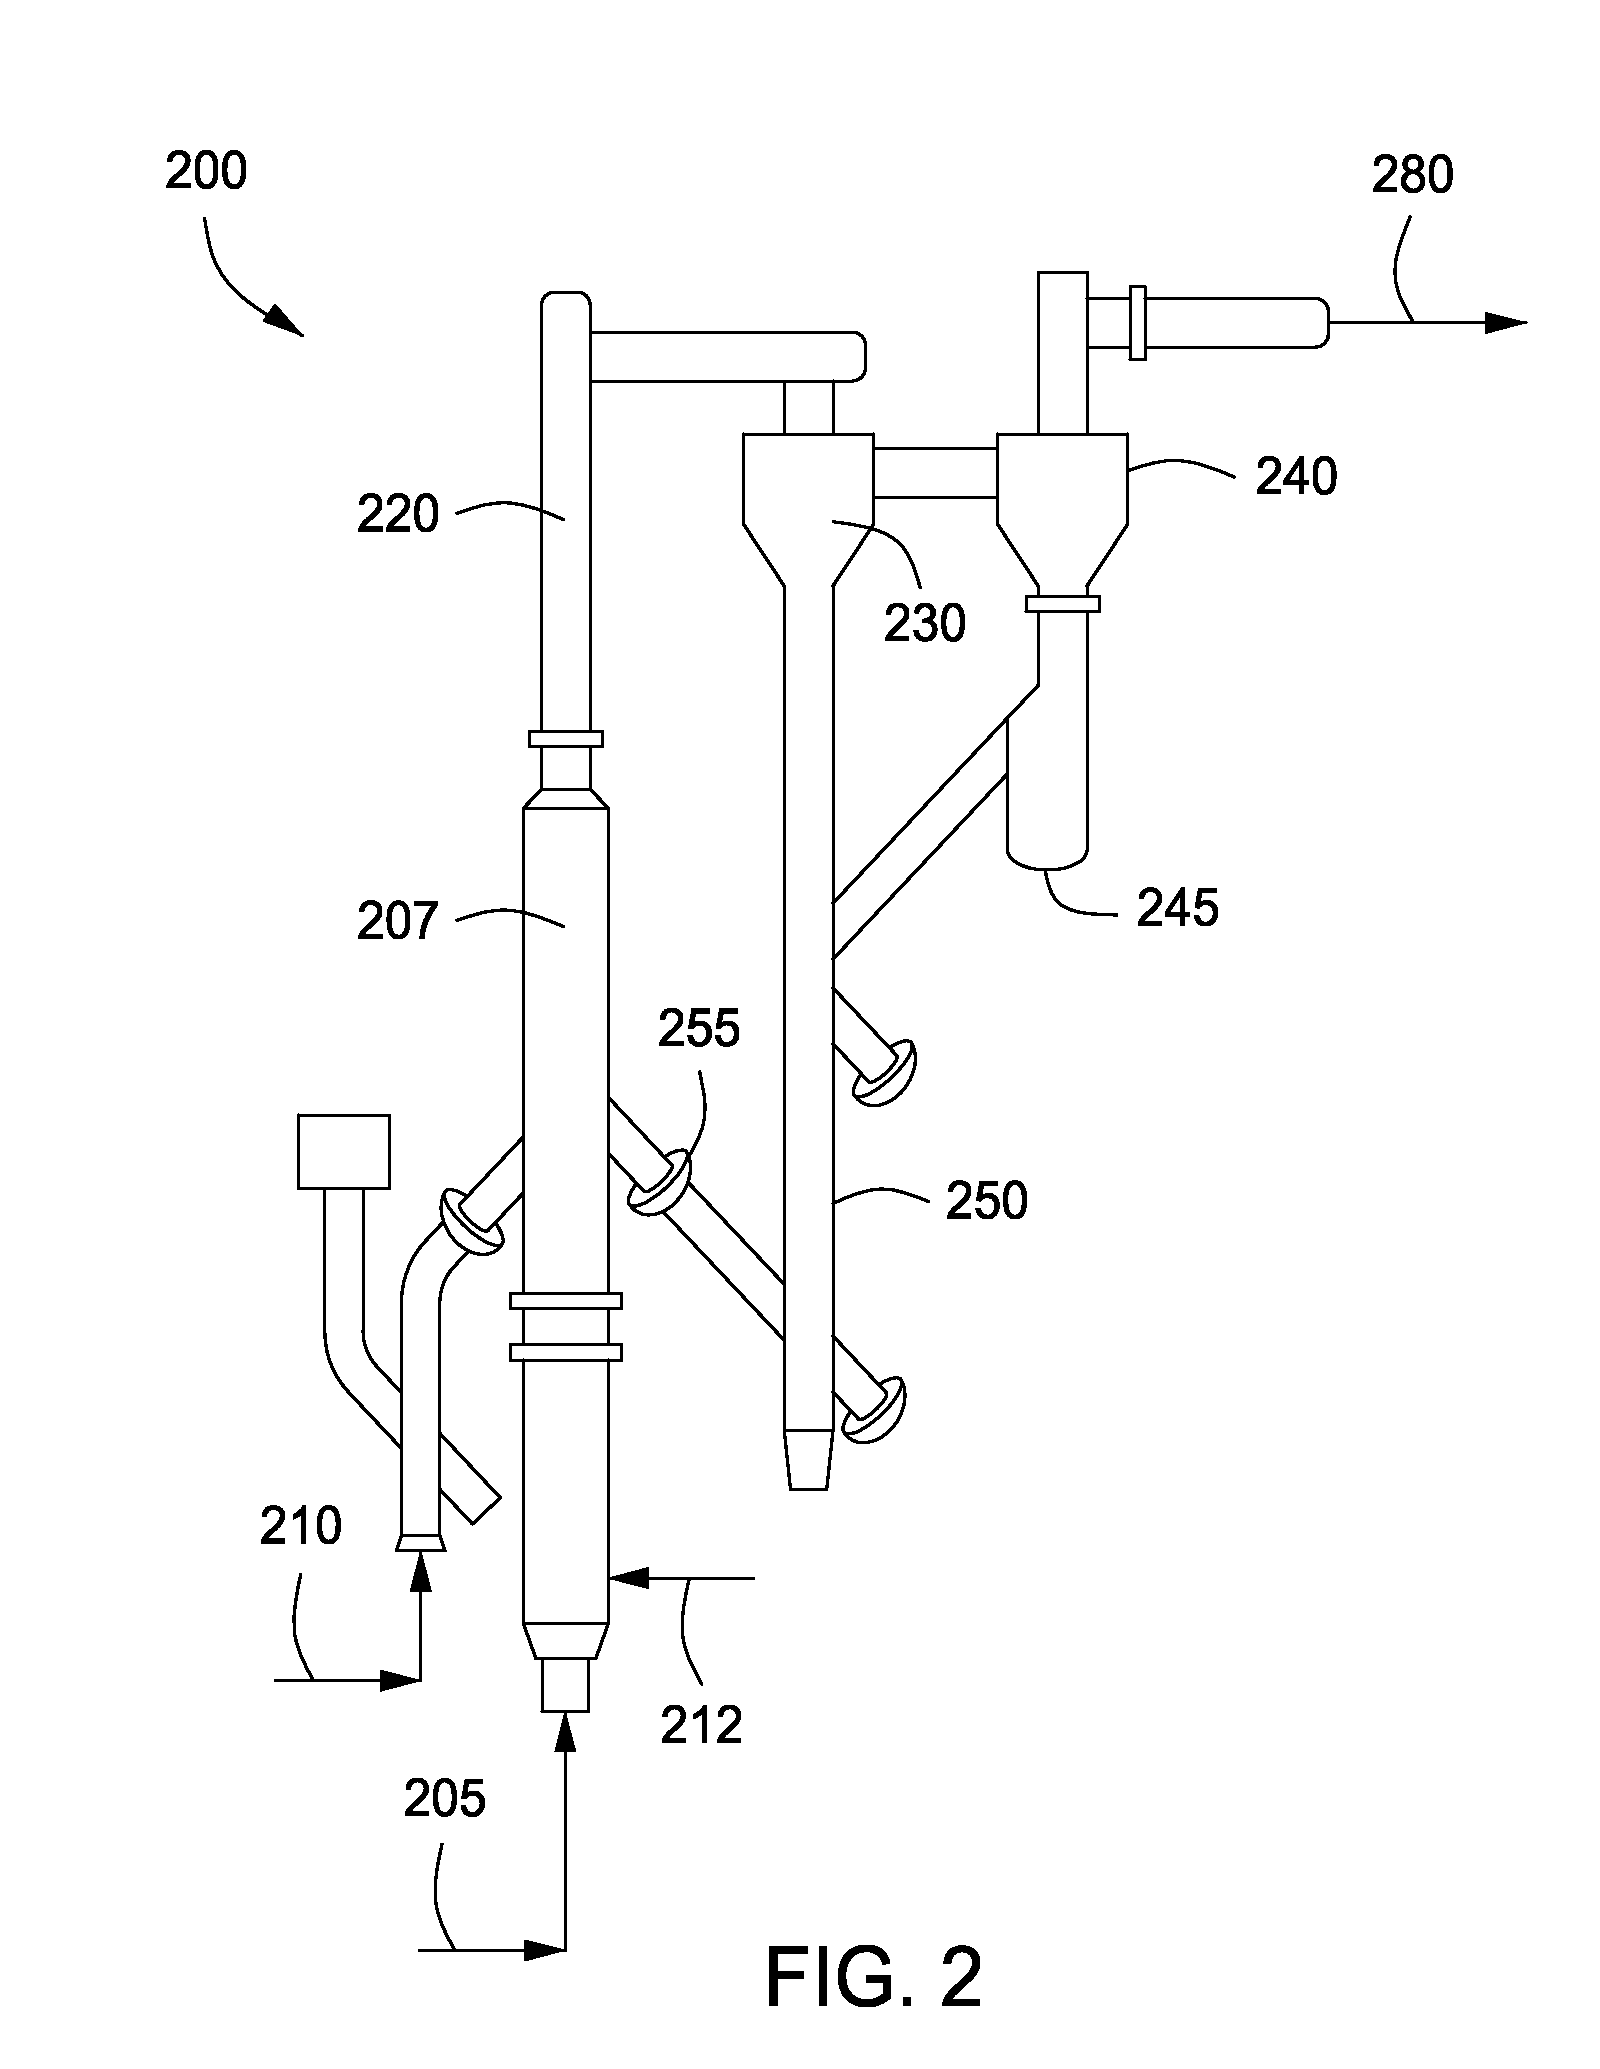 Low oxygen carrier fluid with heating value for feed to transport gasification